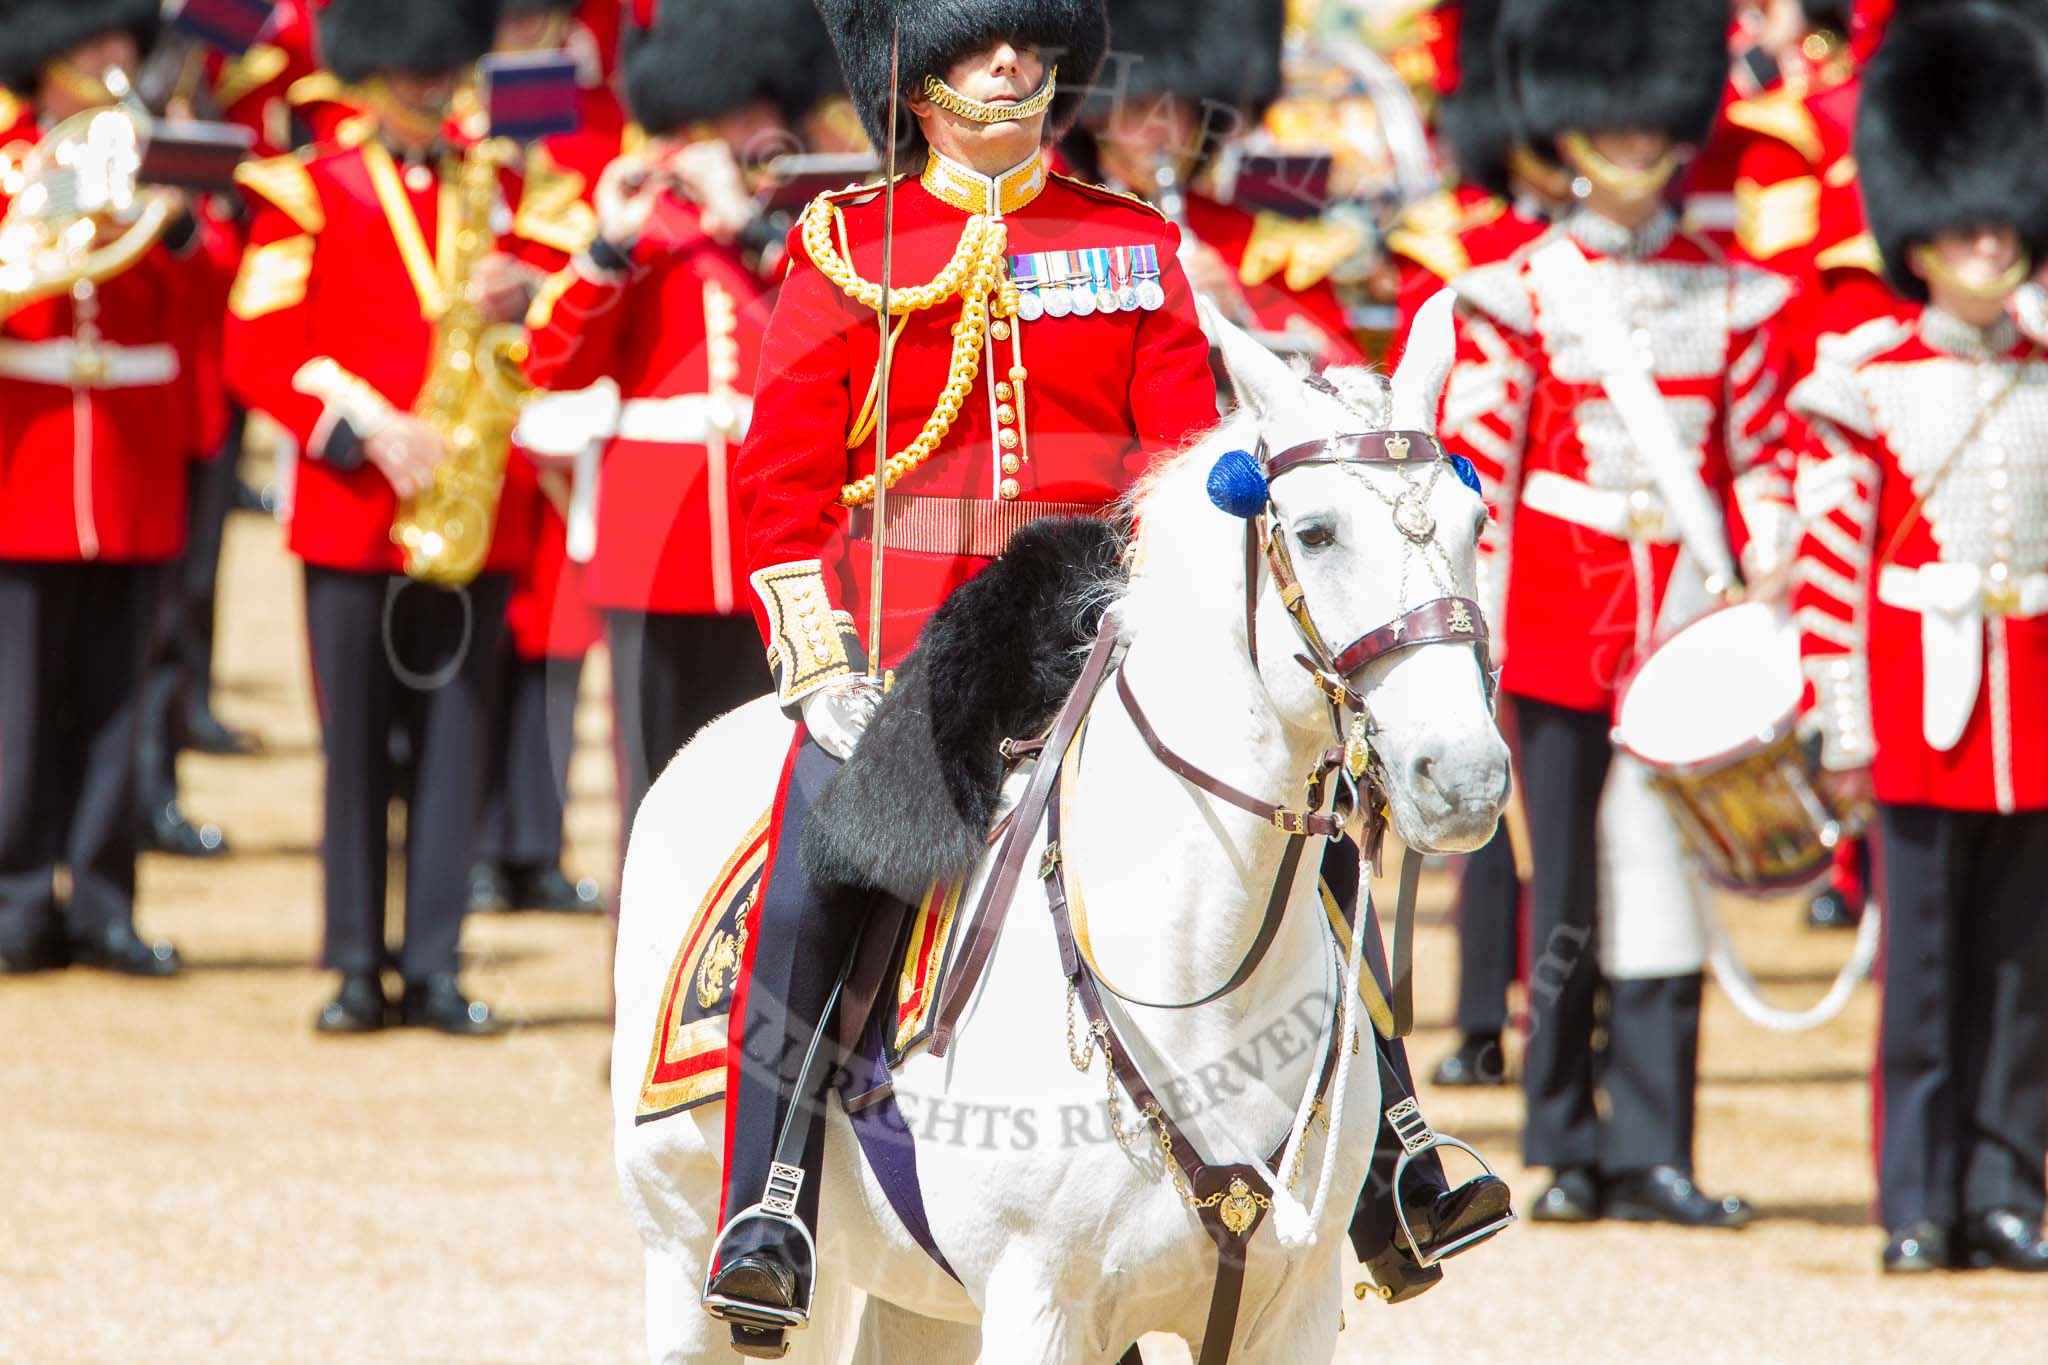 Trooping the Colour 2013: The Field Officer in Brigade Waiting, Lieutenant Colonel Dino Bossi, Welsh Guards, during the National Anthem after the Colour has been handed over to the Ensign. Image #468, 15 June 2013 11:21 Horse Guards Parade, London, UK